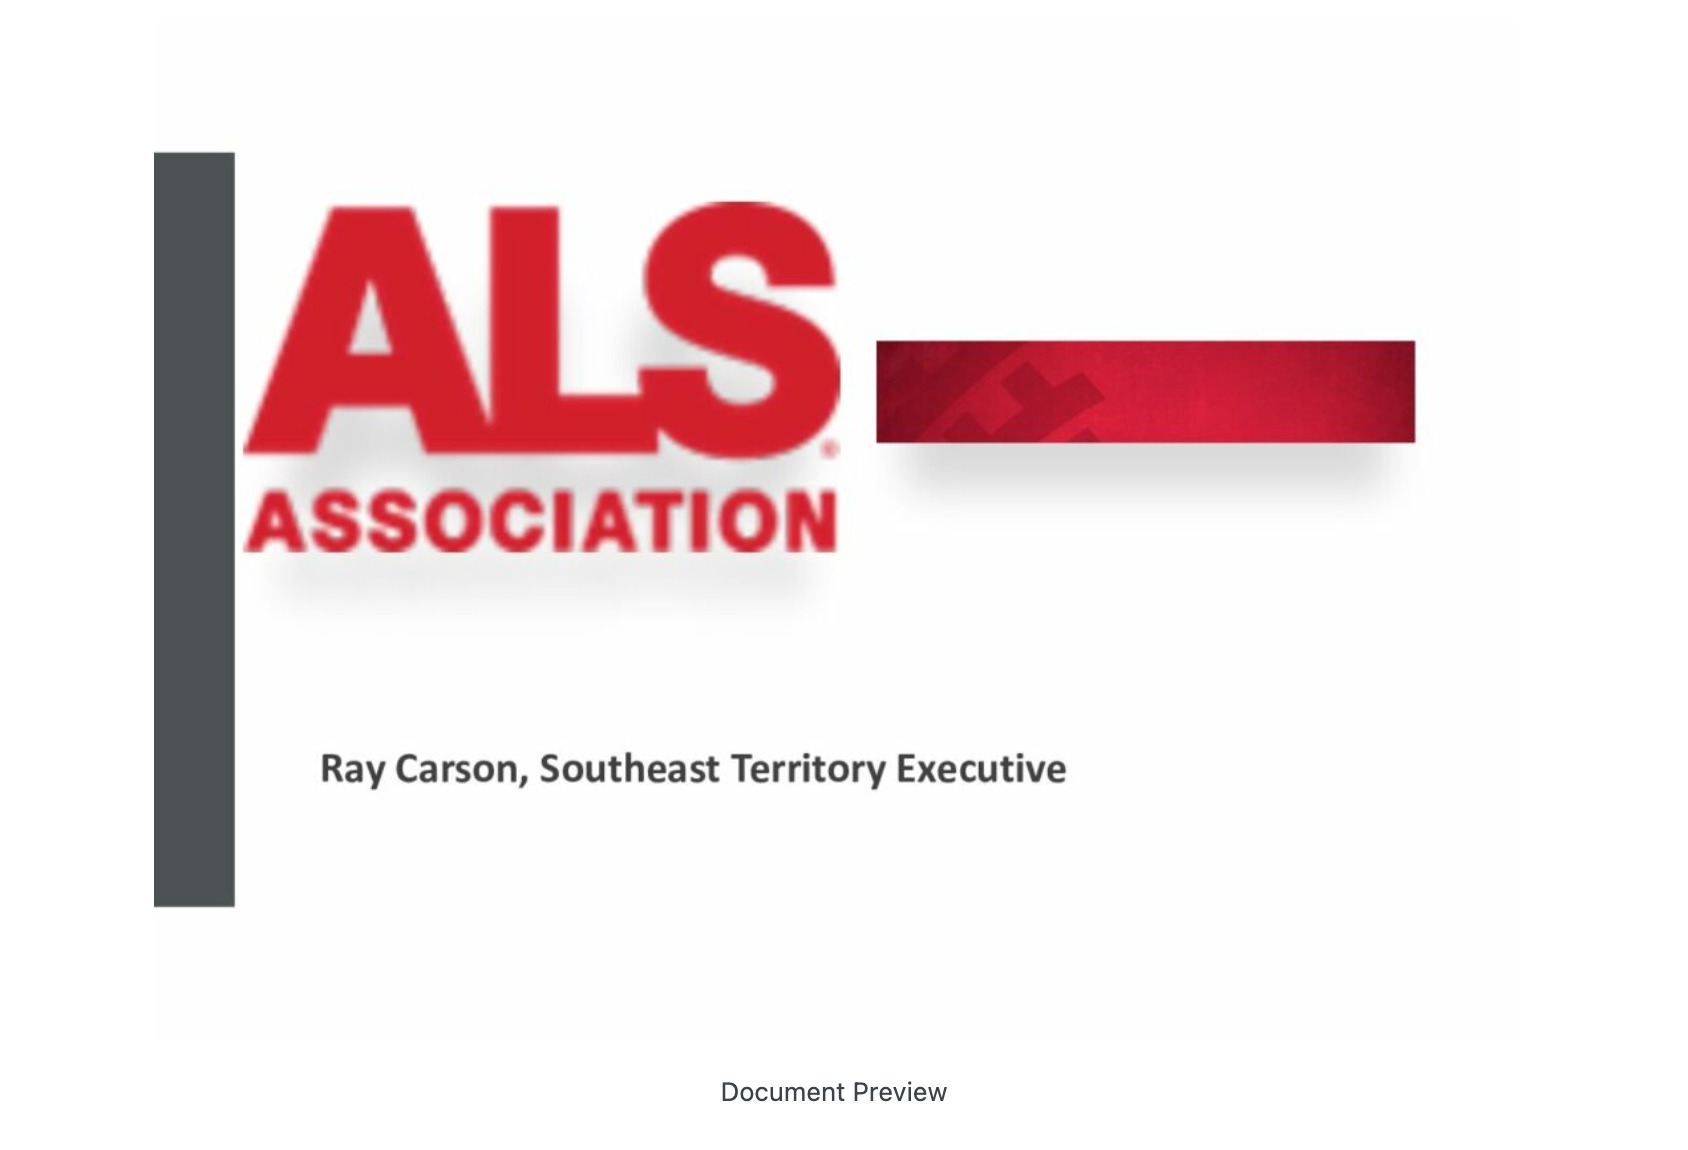 ALS Association – About Resources and Mission